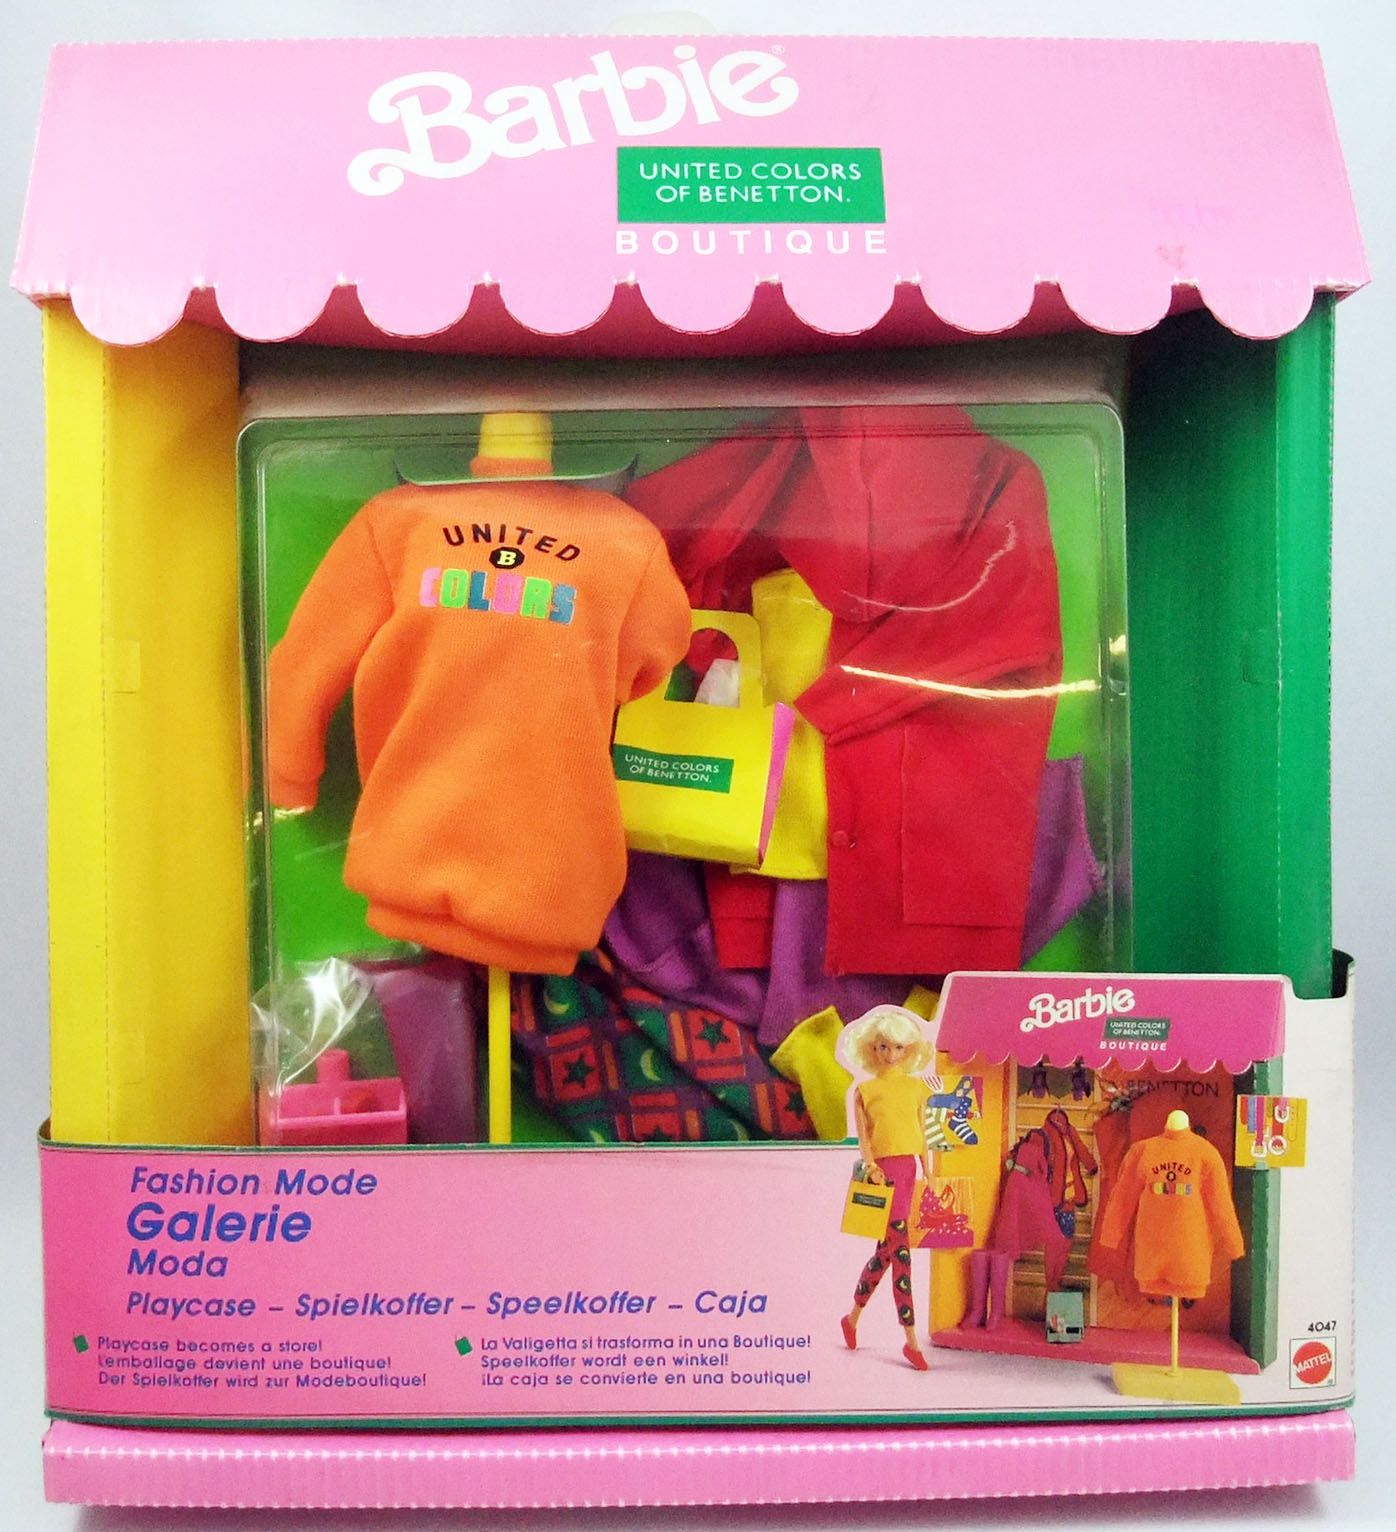 - Fashions Galerie - United Colors of Benetton Mattel 1991